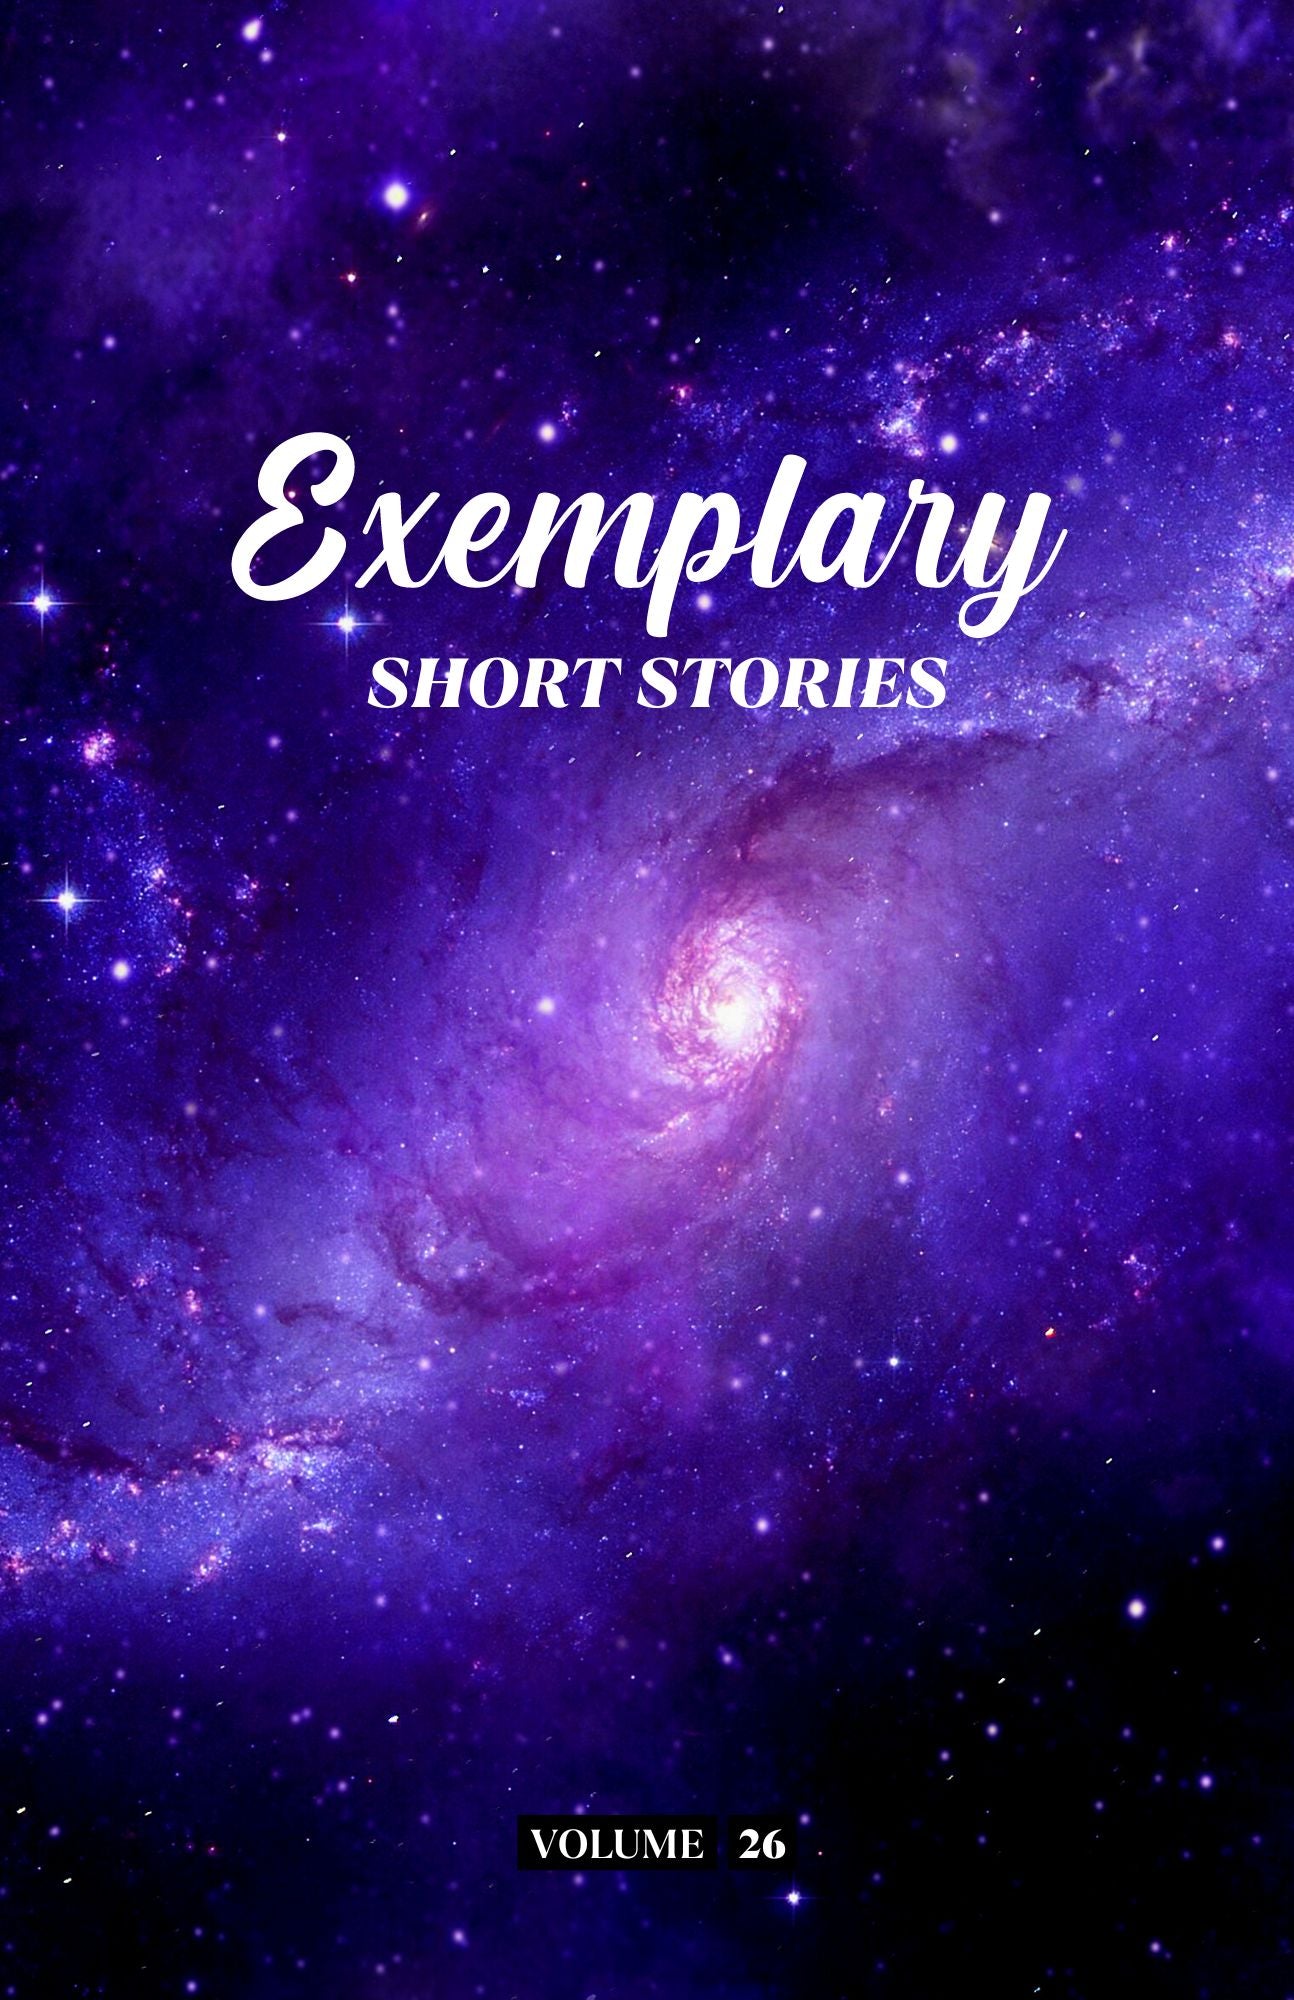 Exemplary Short Stories Volume 26 (Physical Book Pre-Order)